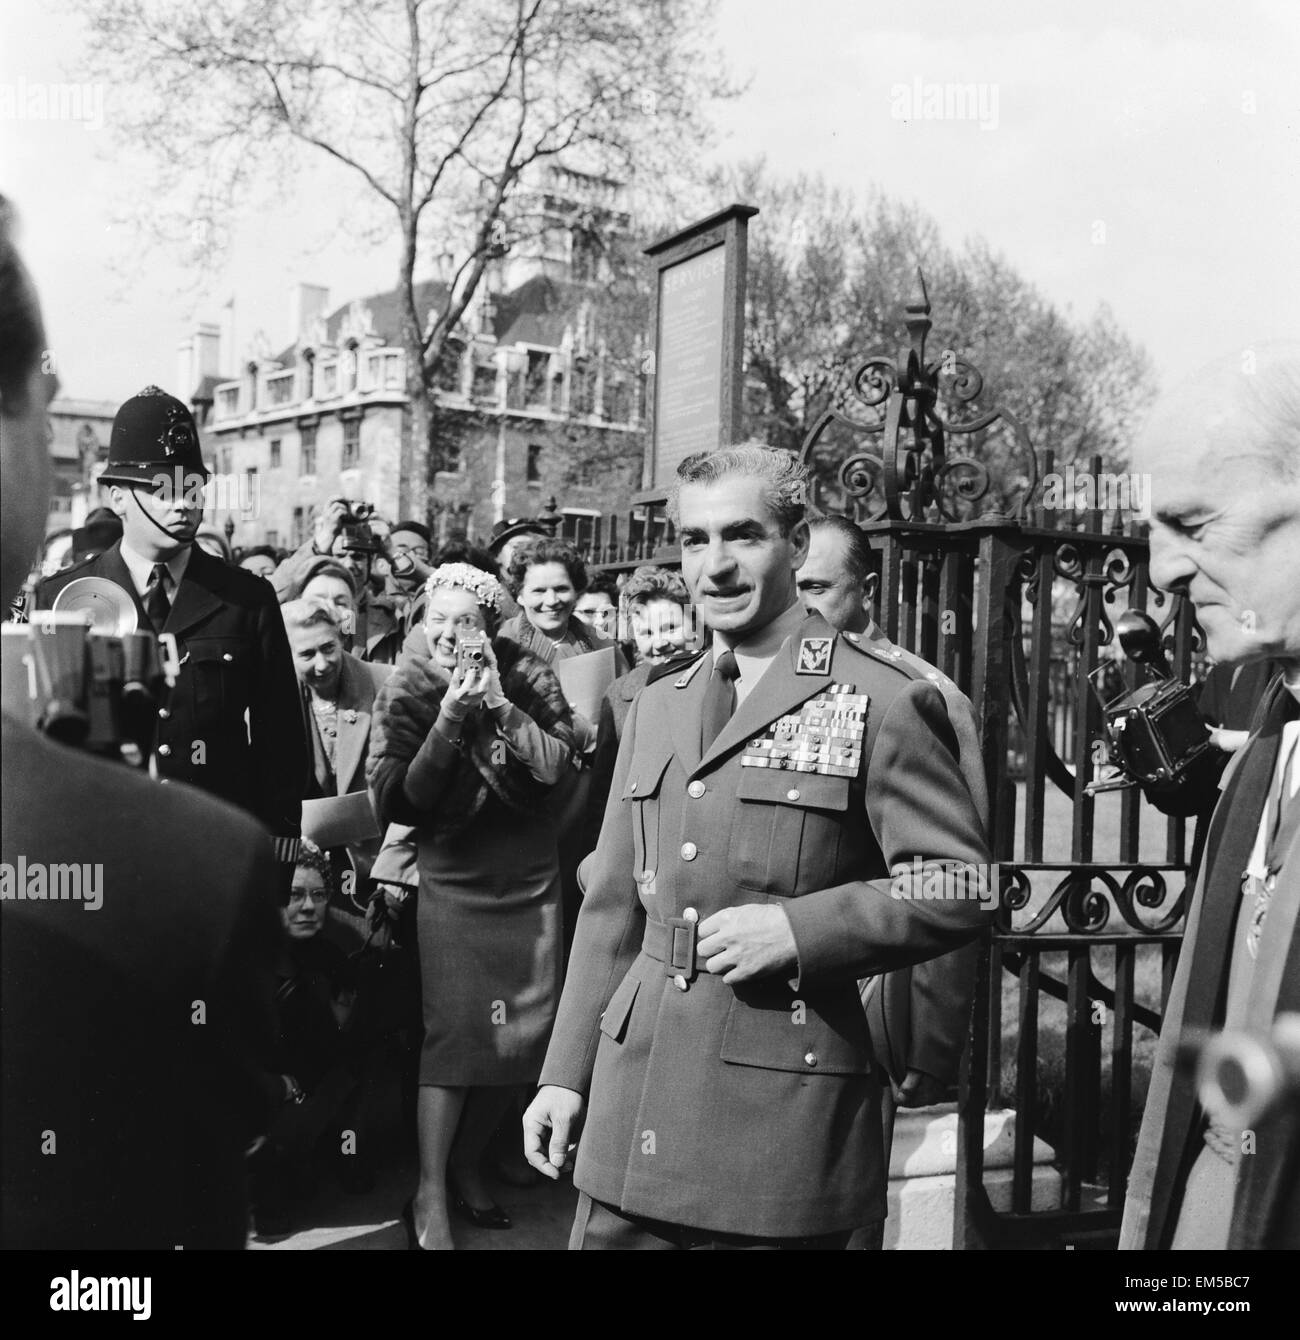 Mohammad-Reza Shah Pahlavi, the Shah of Iran, pays a visit to Westminster Abbey to lay a wreath at the tomb of the unknown soldier during his visit to Britain. 5th May 1959. Stock Photo